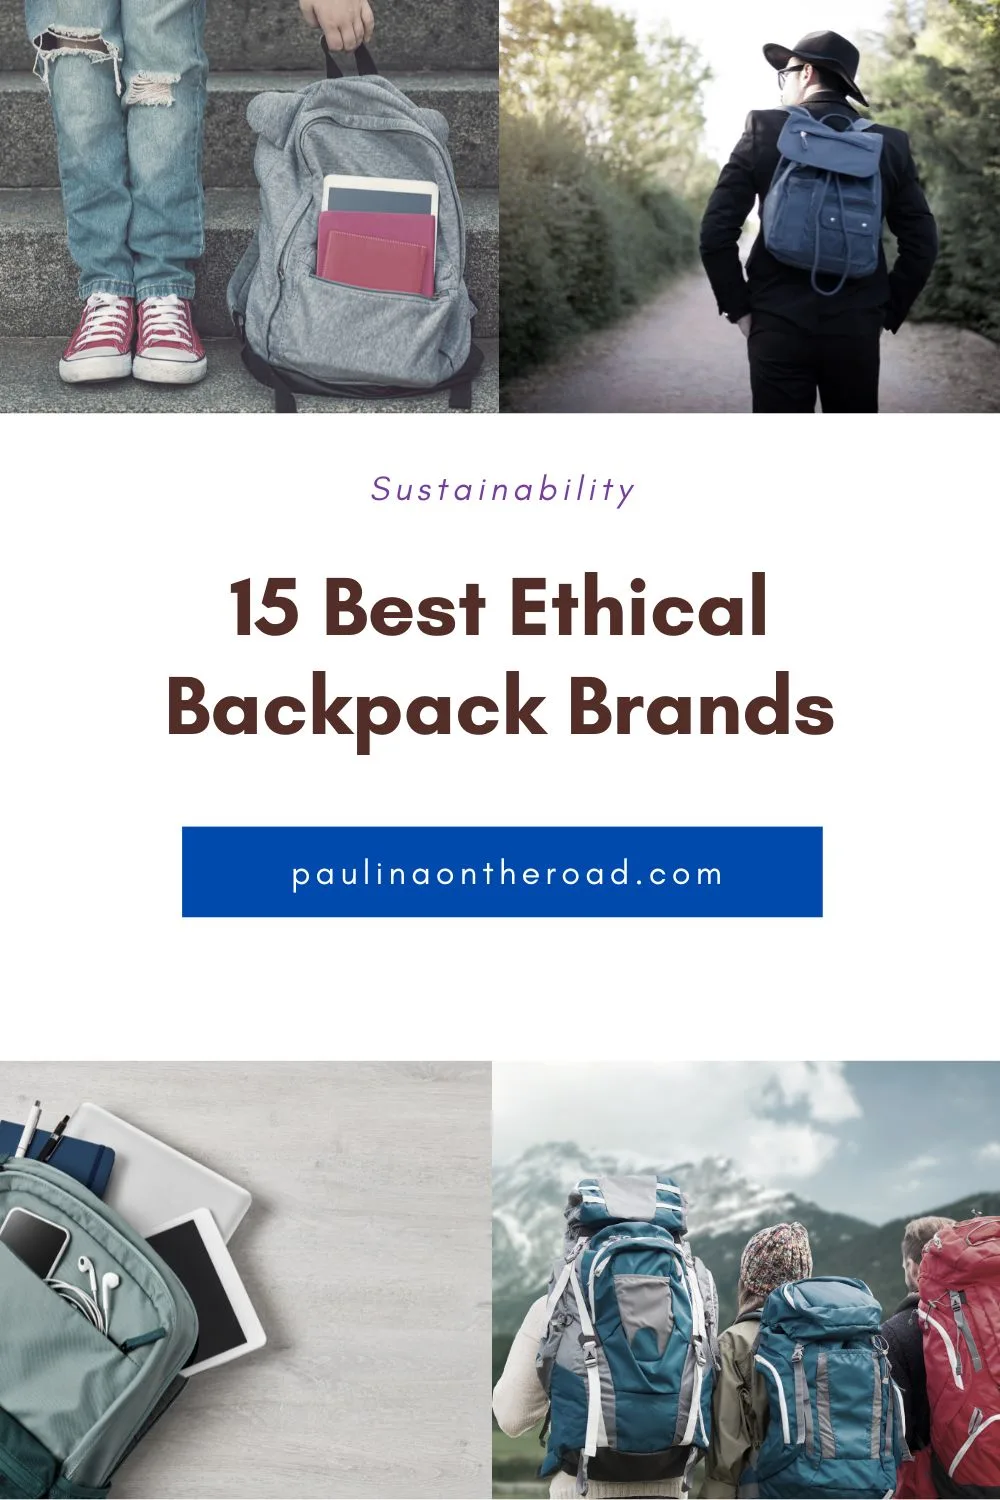 Tram uitroepen salaris 16 Cool Brands for Sustainable Backpacks - Paulina on the road